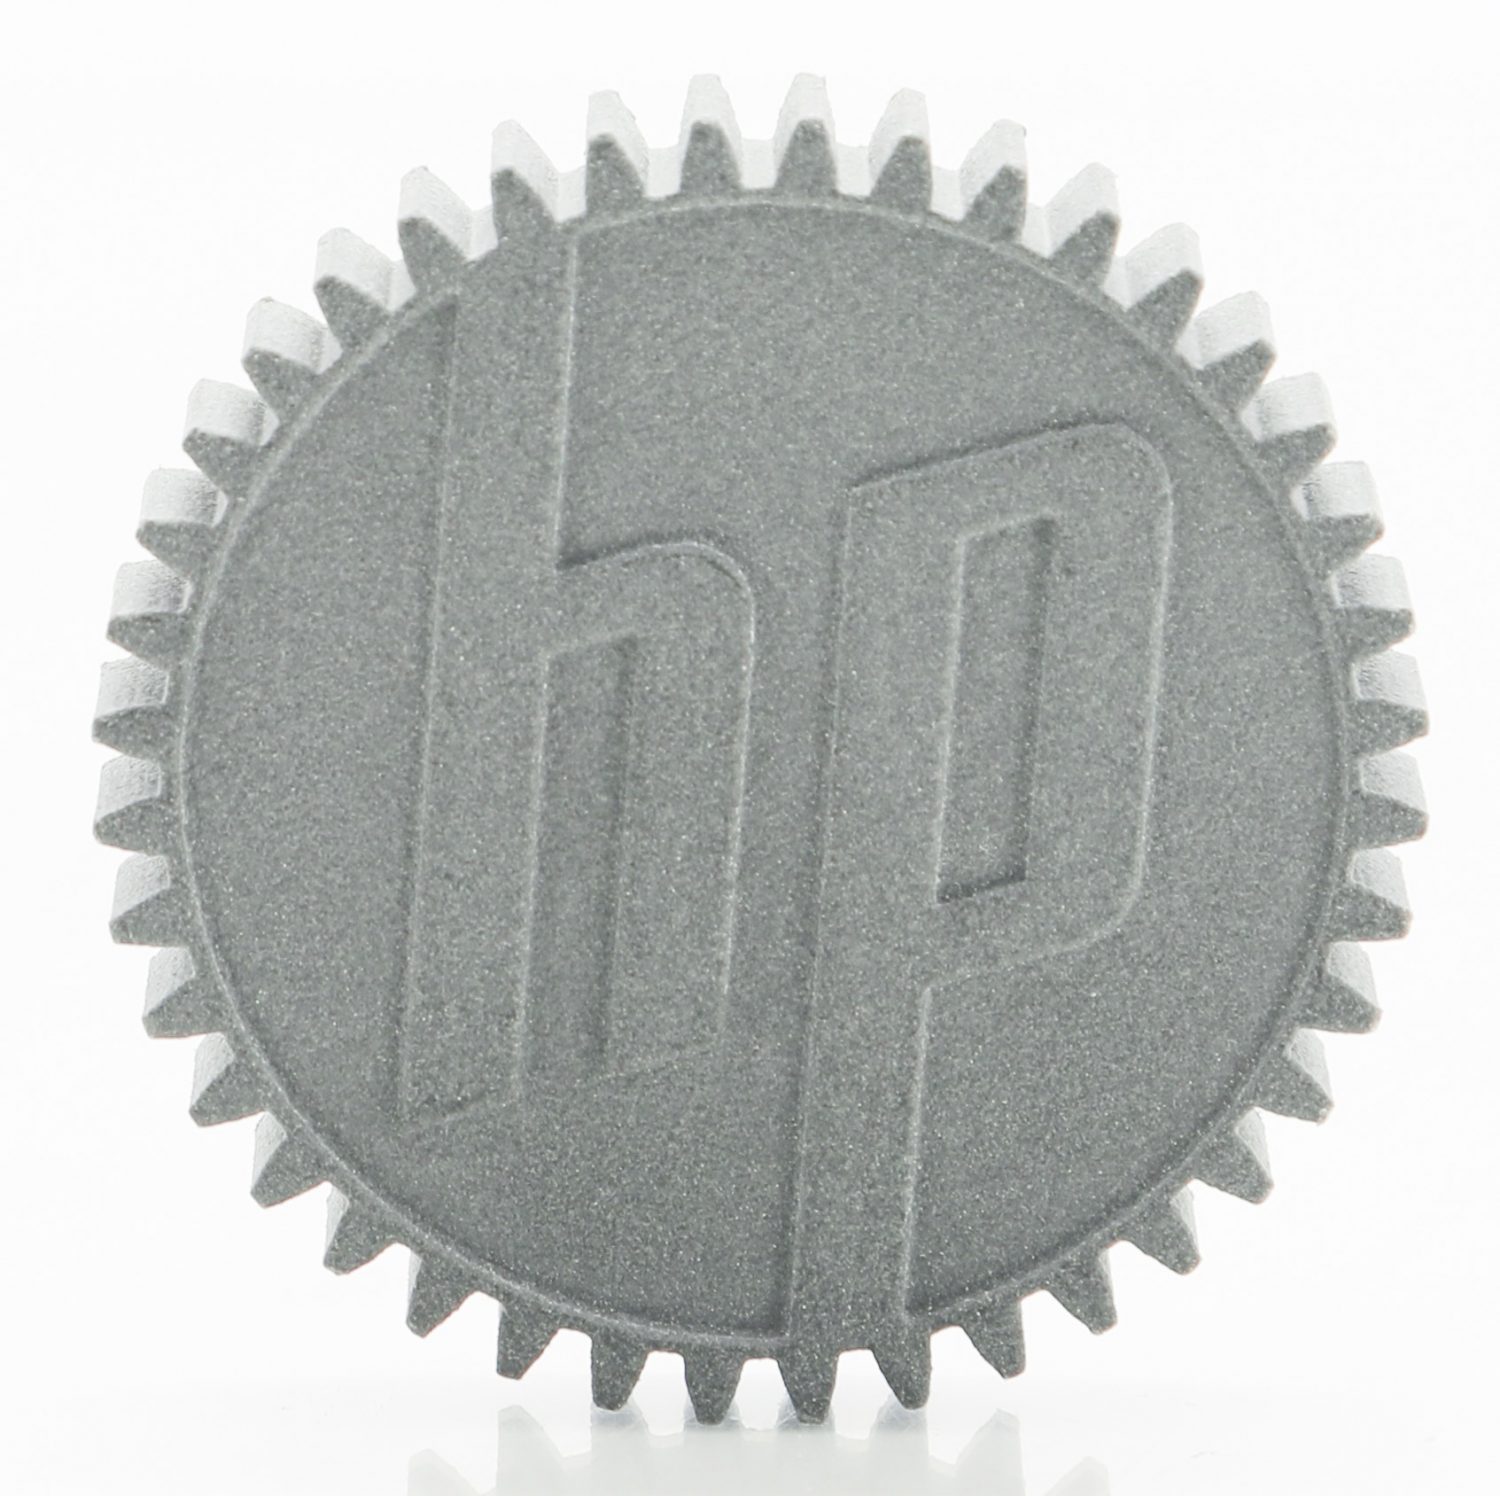 The HP logo embossed on a 3D-printed plastic gear.